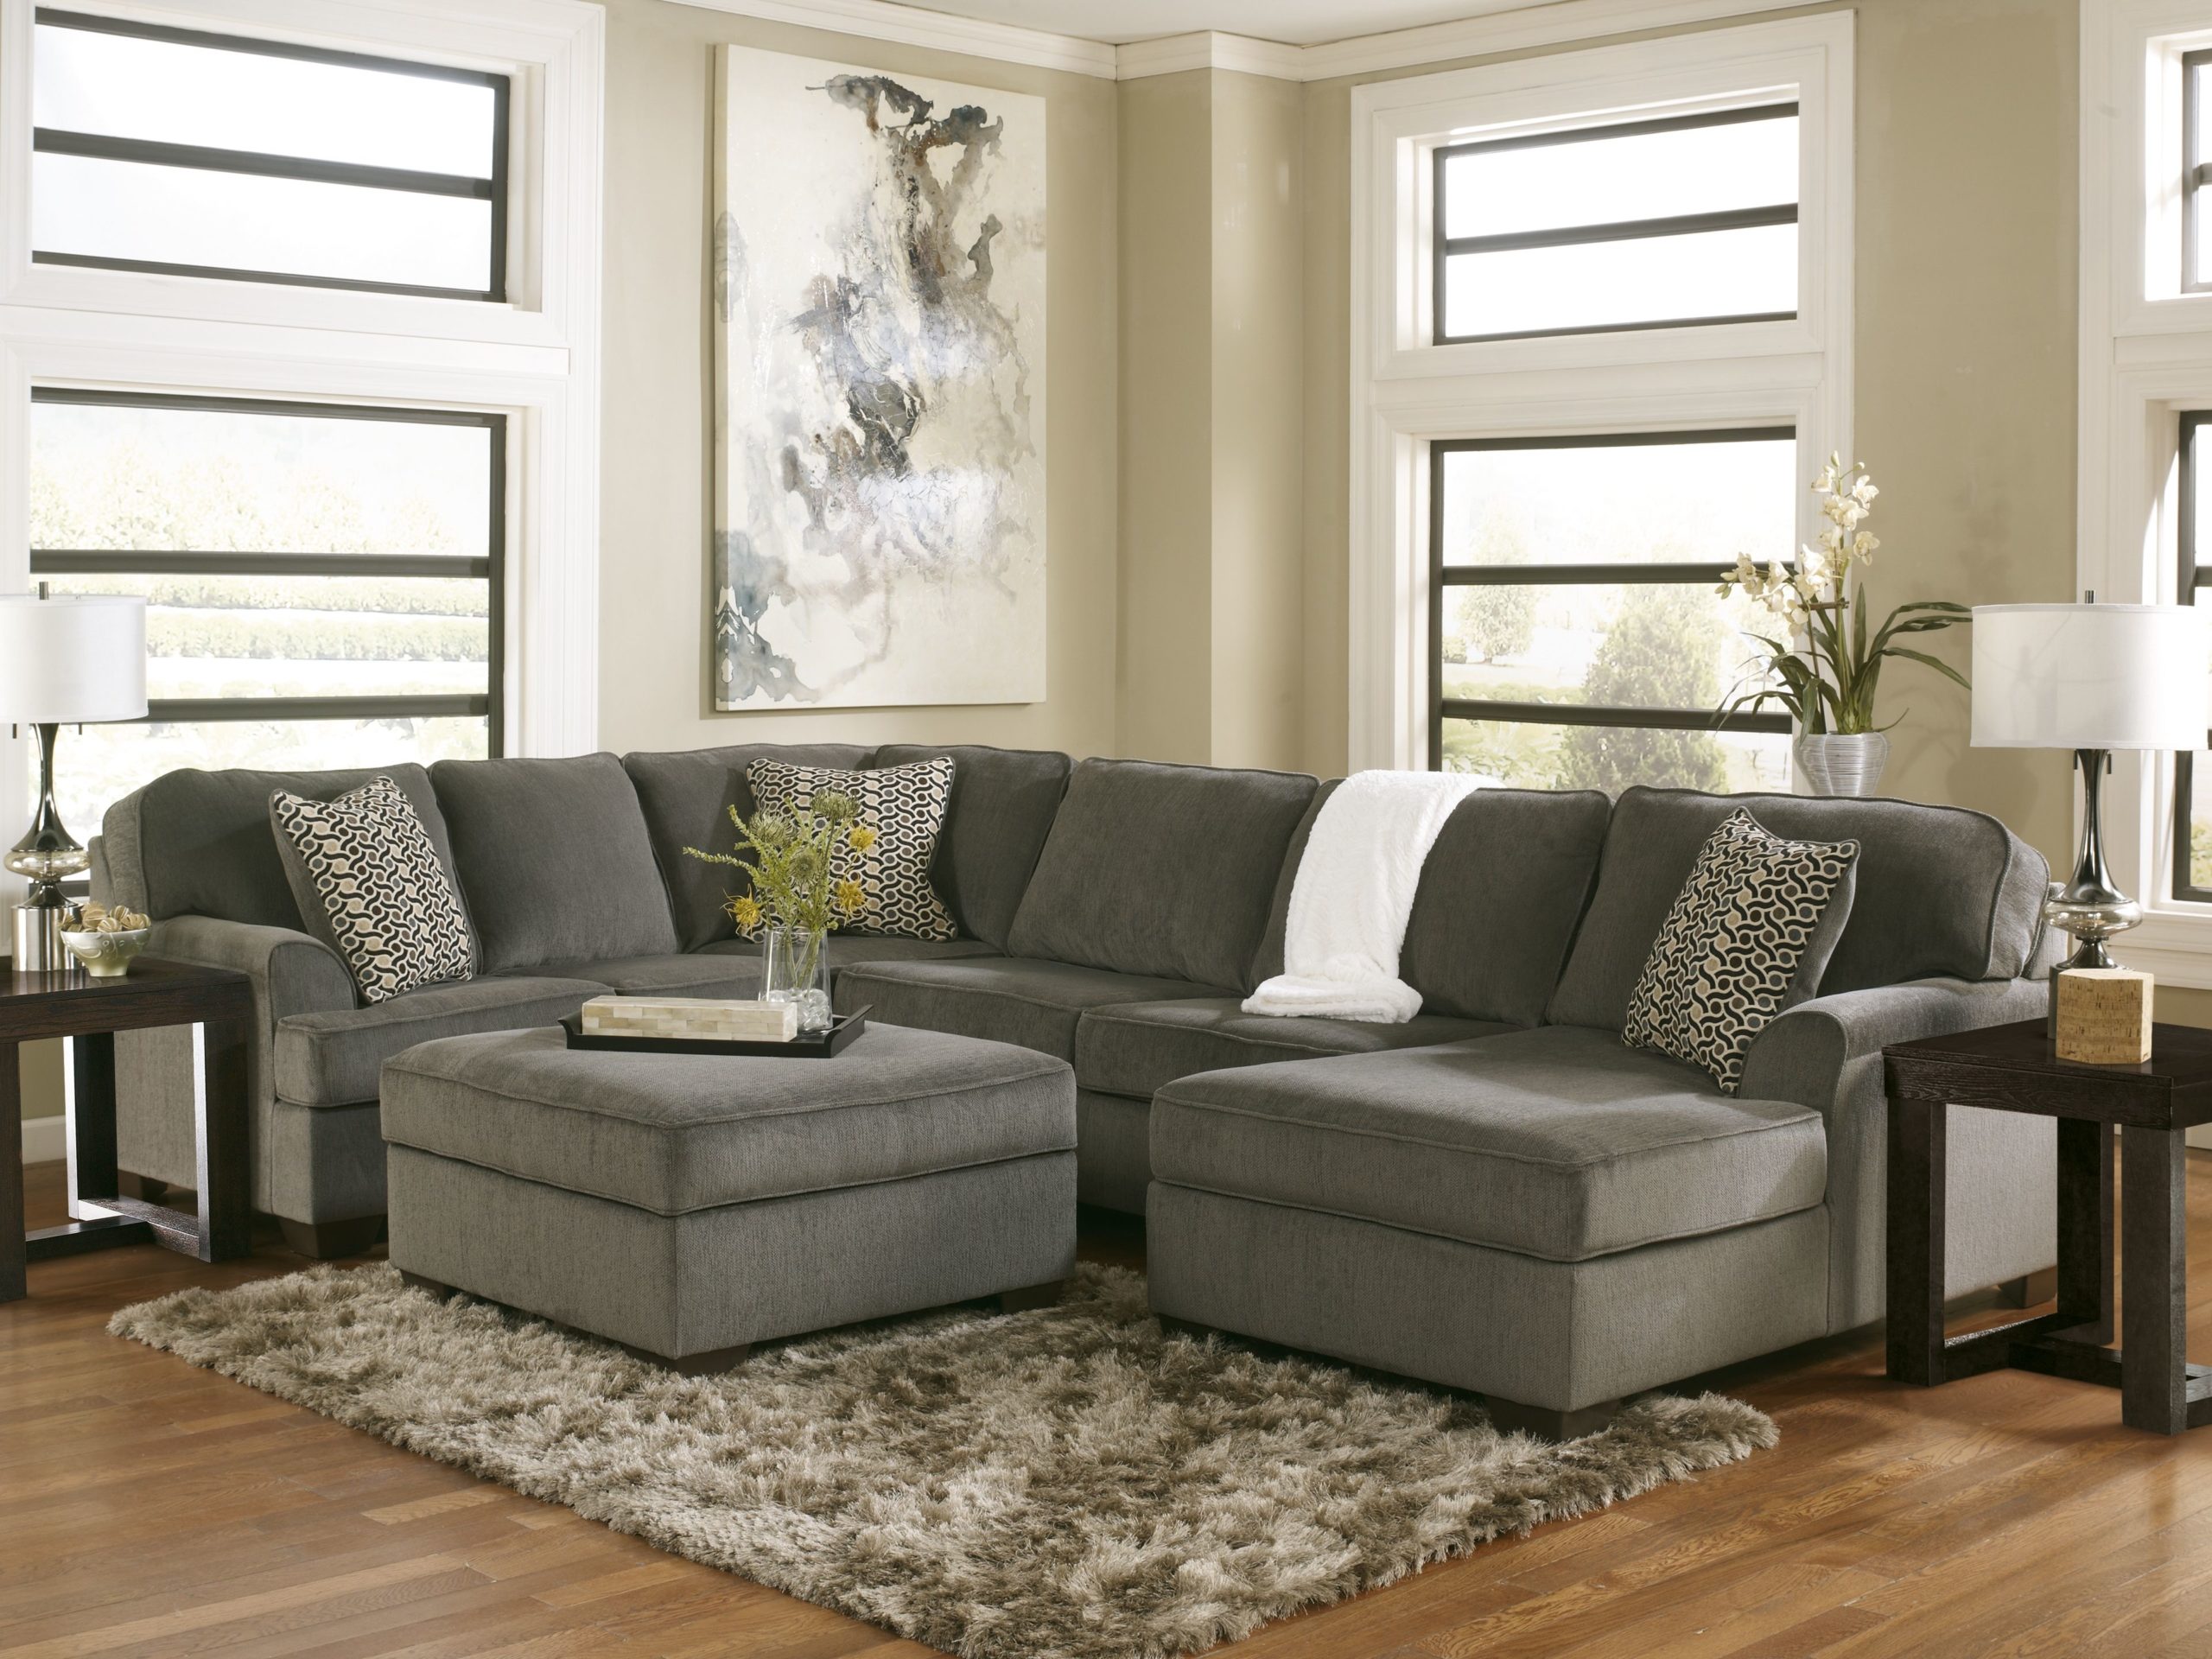 living room furniture sets with chaise